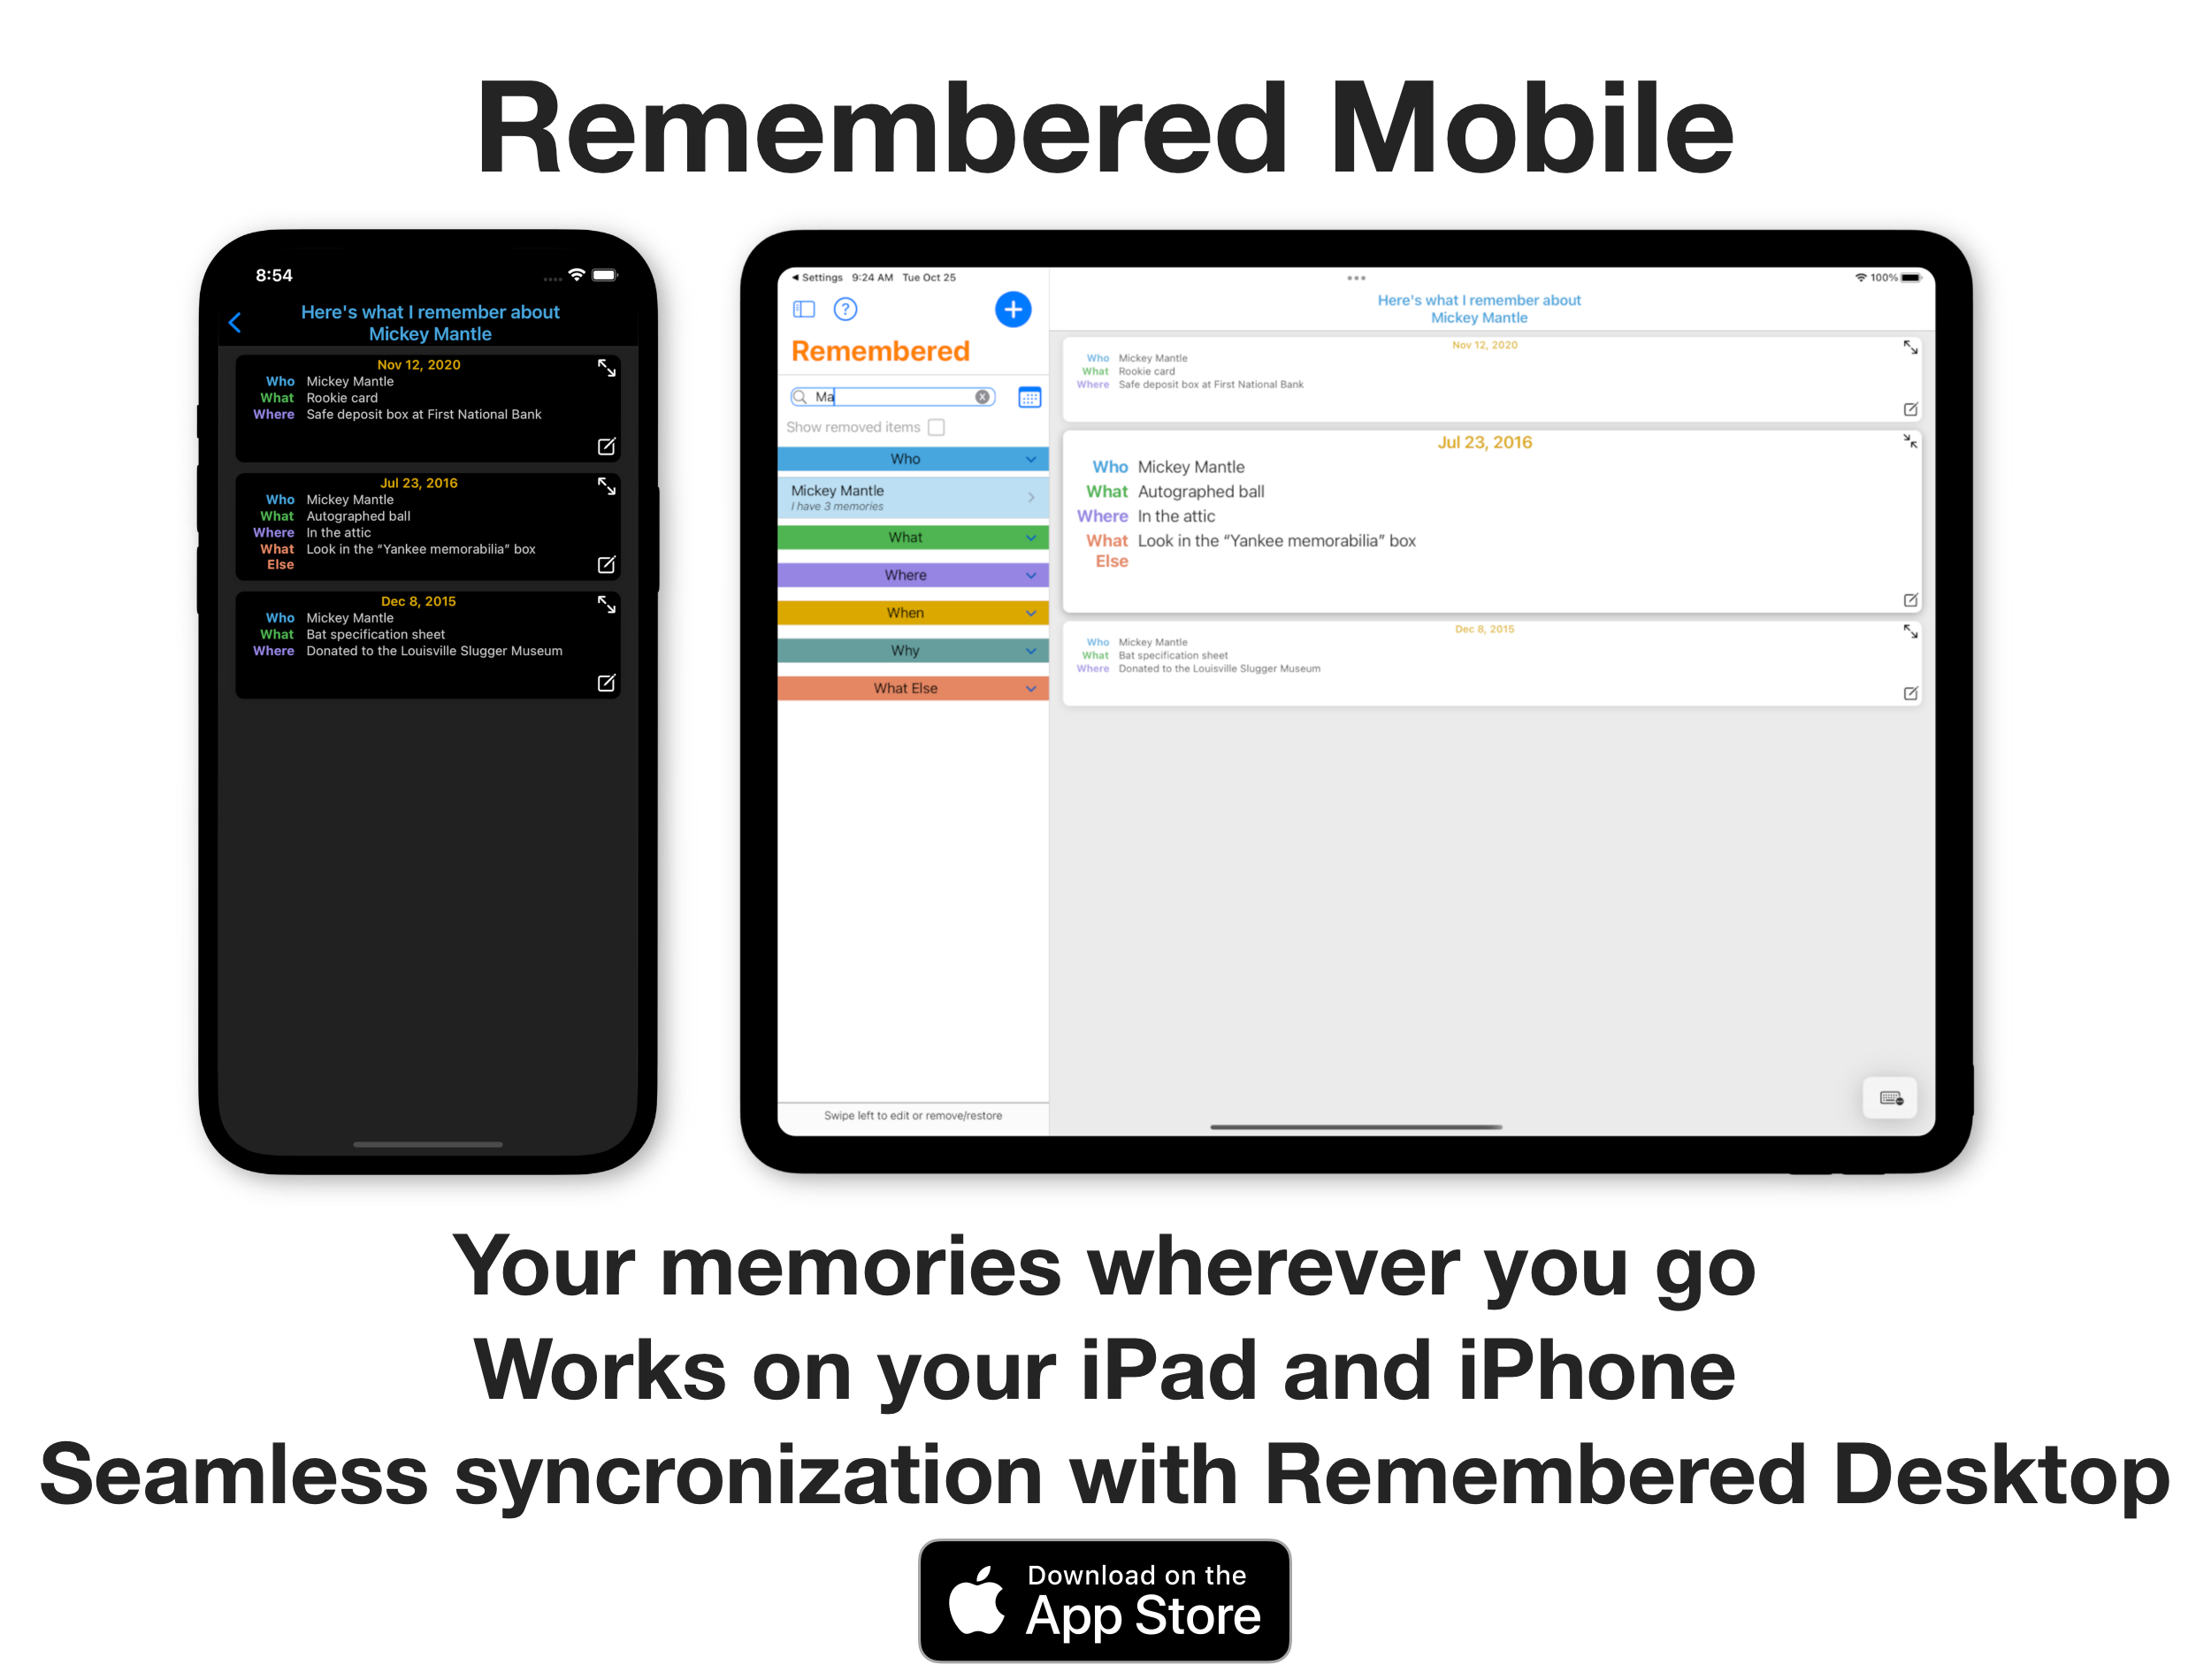 A link to Remembered Mobile on the Apple App Store